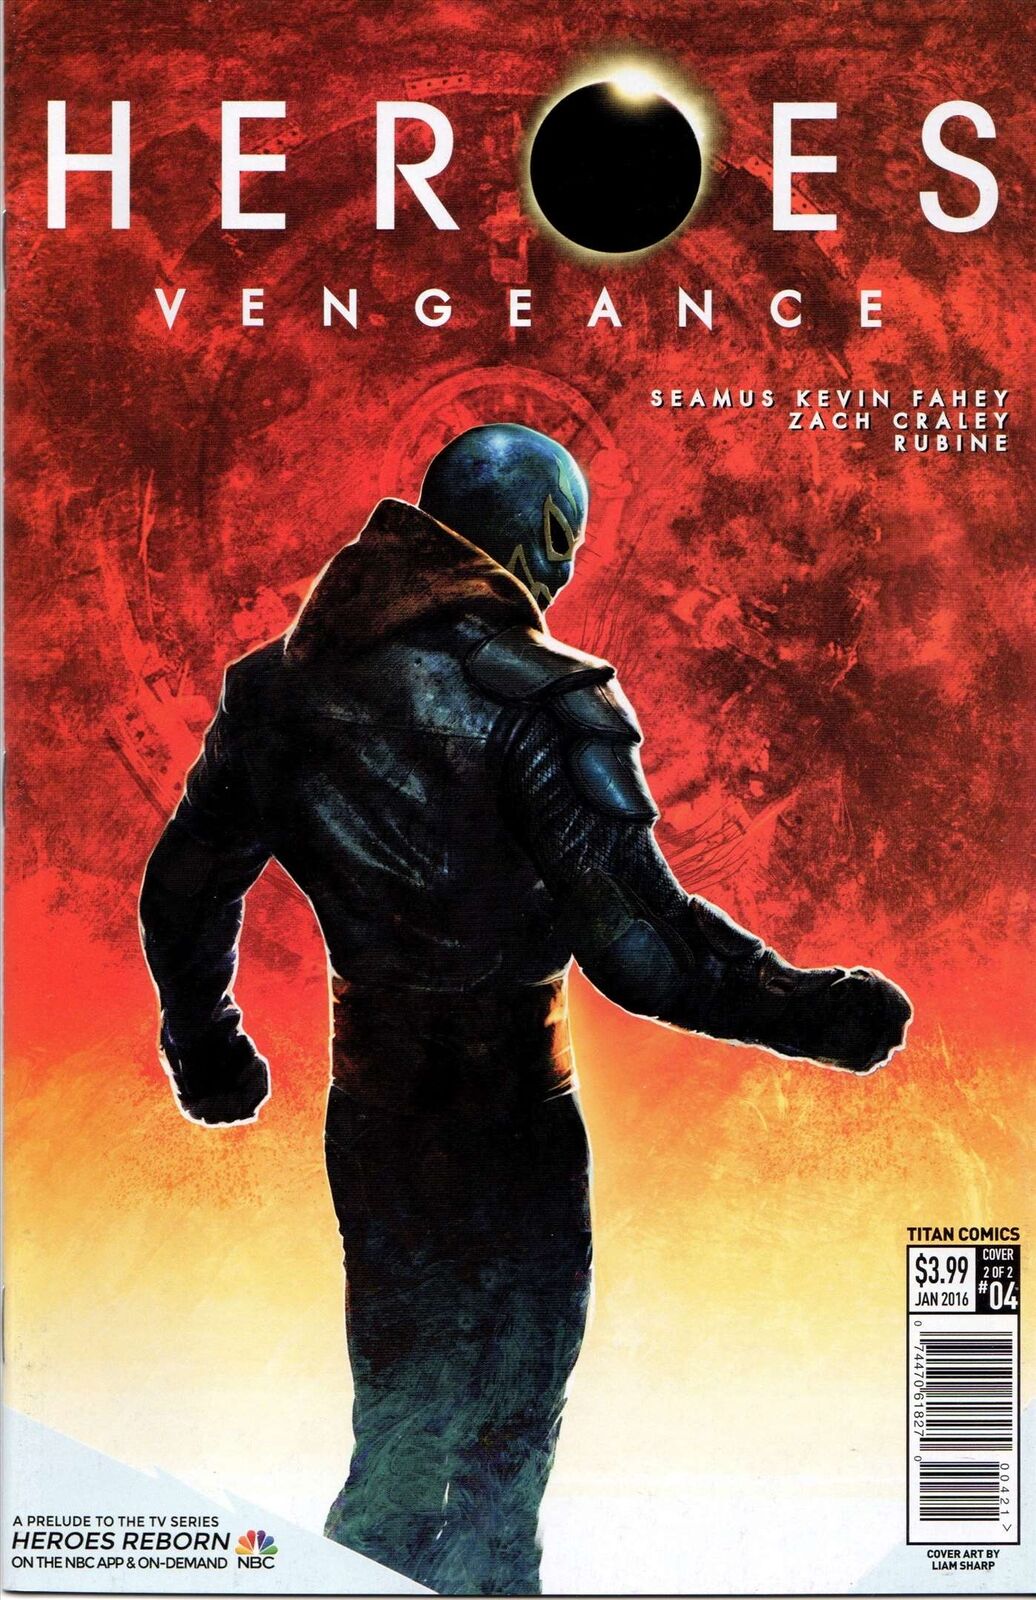 Heroes: Vengeance #4A VF; Titan | Based on NBC TV Show - we combine shipping